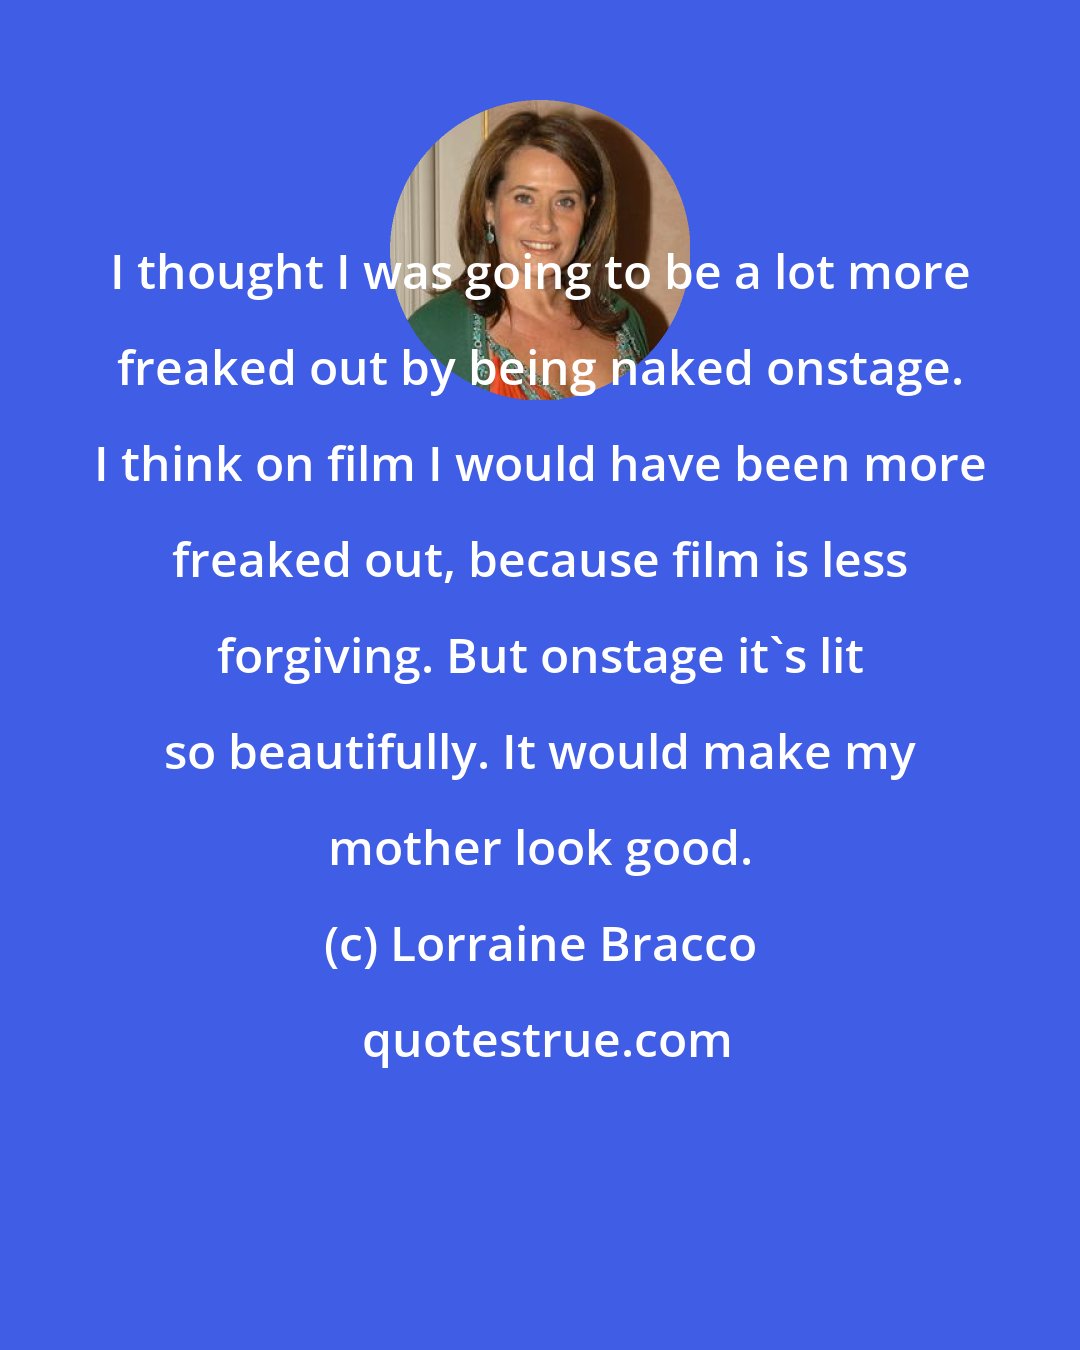 Lorraine Bracco: I thought I was going to be a lot more freaked out by being naked onstage. I think on film I would have been more freaked out, because film is less forgiving. But onstage it's lit so beautifully. It would make my mother look good.